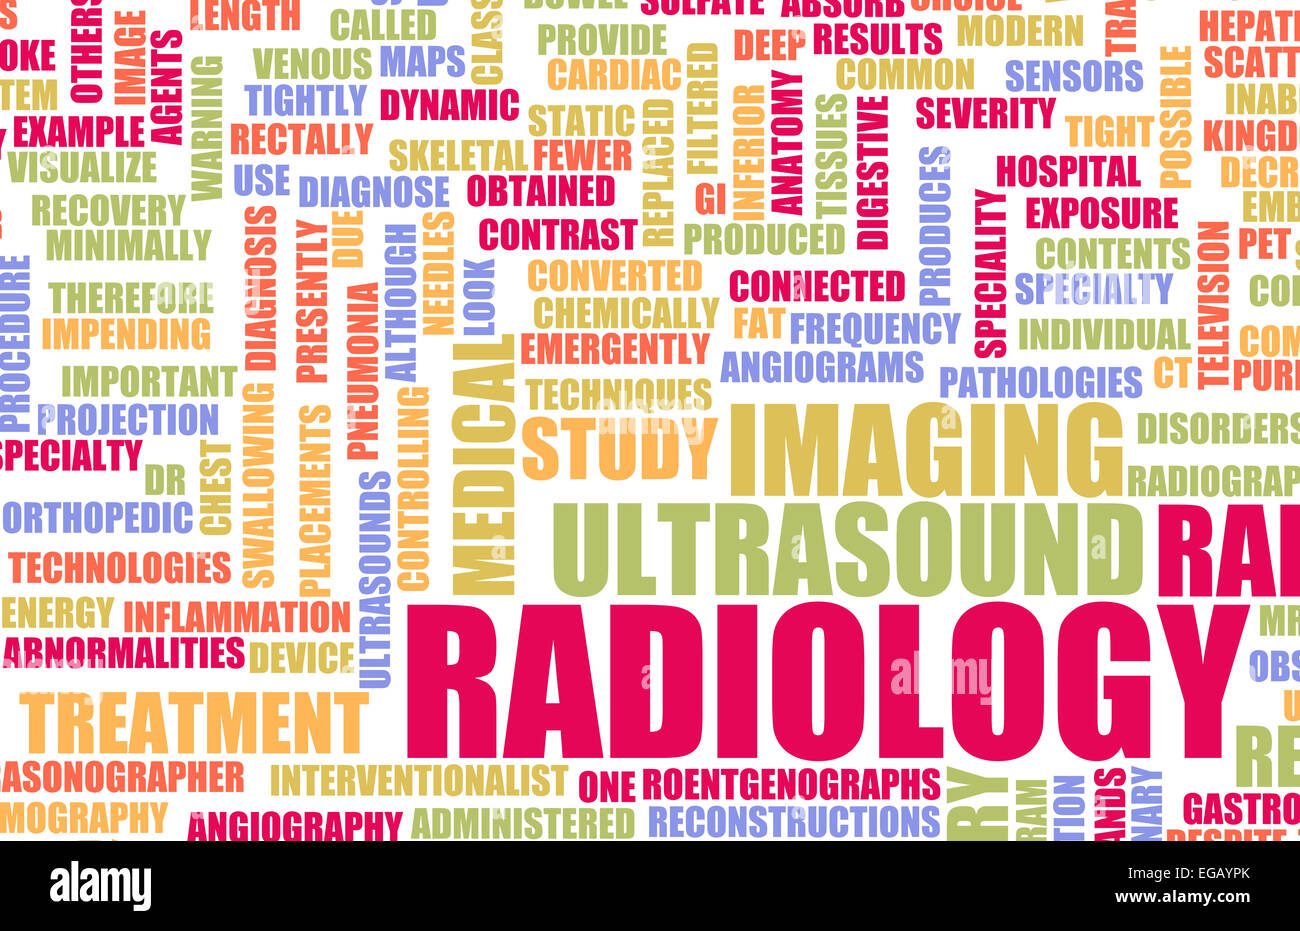 Radiology or Radiologist Medical Field Specialty As Art Stock Photo